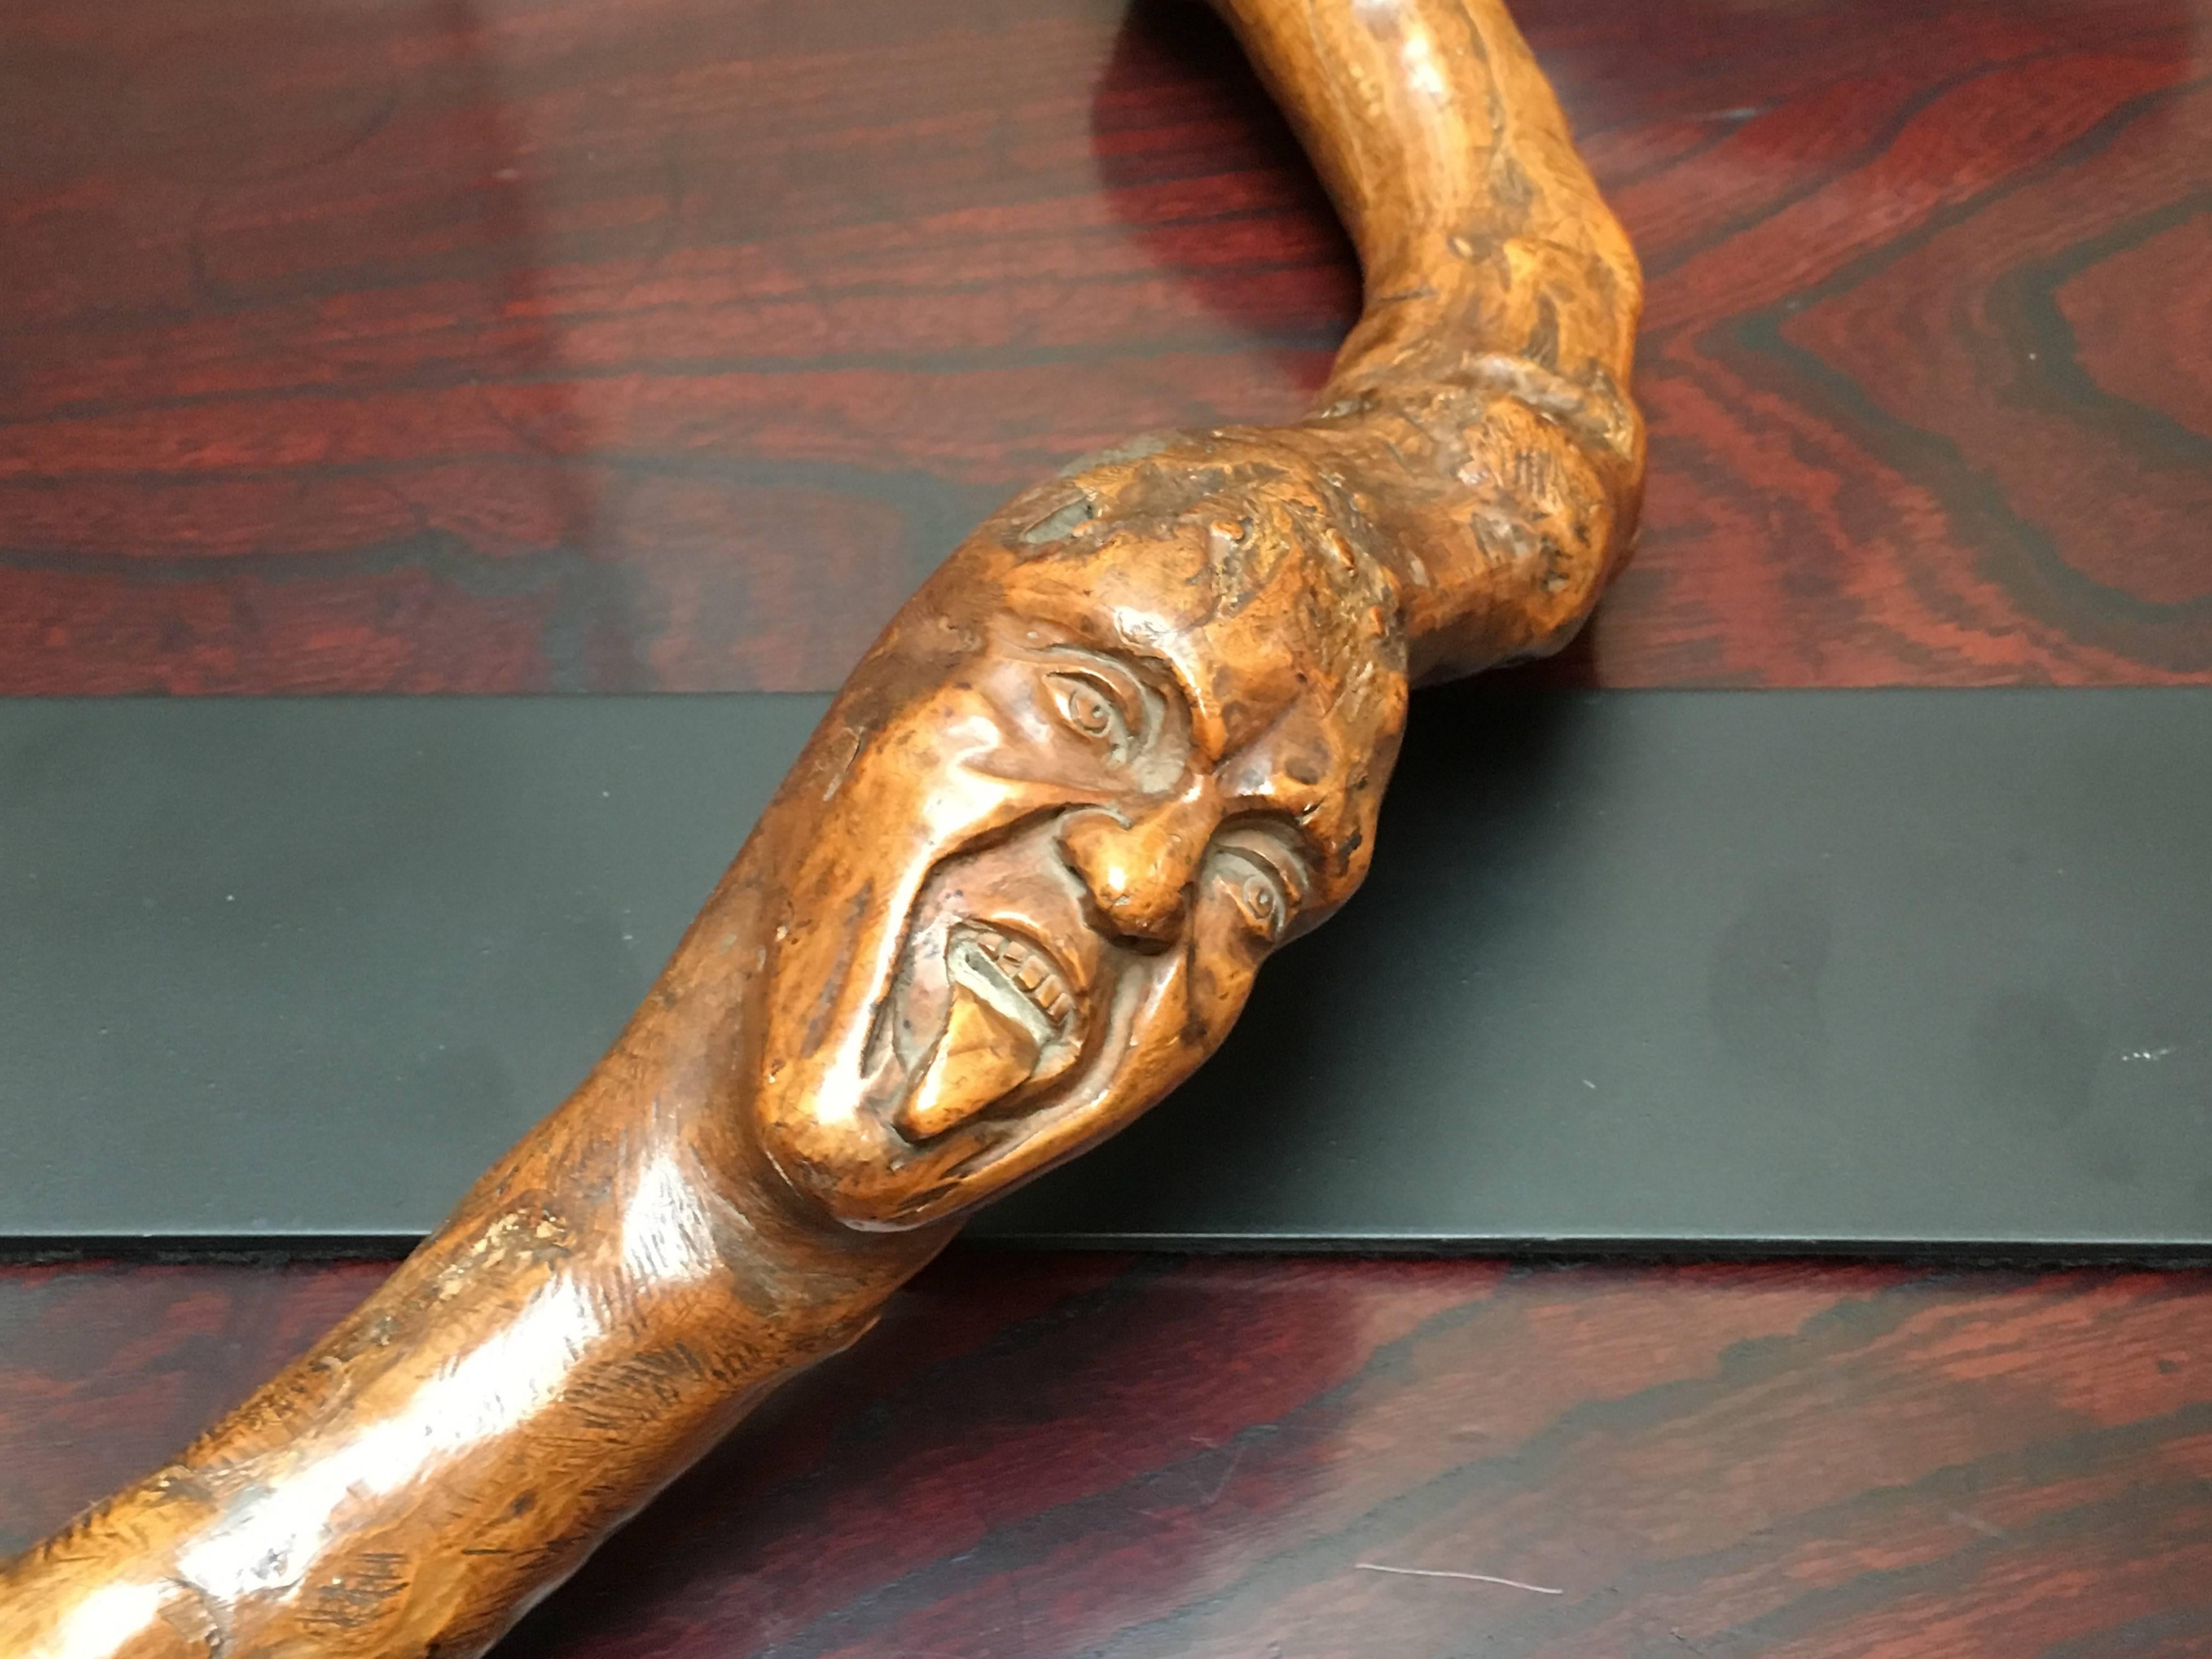 Hand-Carved American Folk Art Snake and Wood Spirits Walking Stick, Early 20th Century